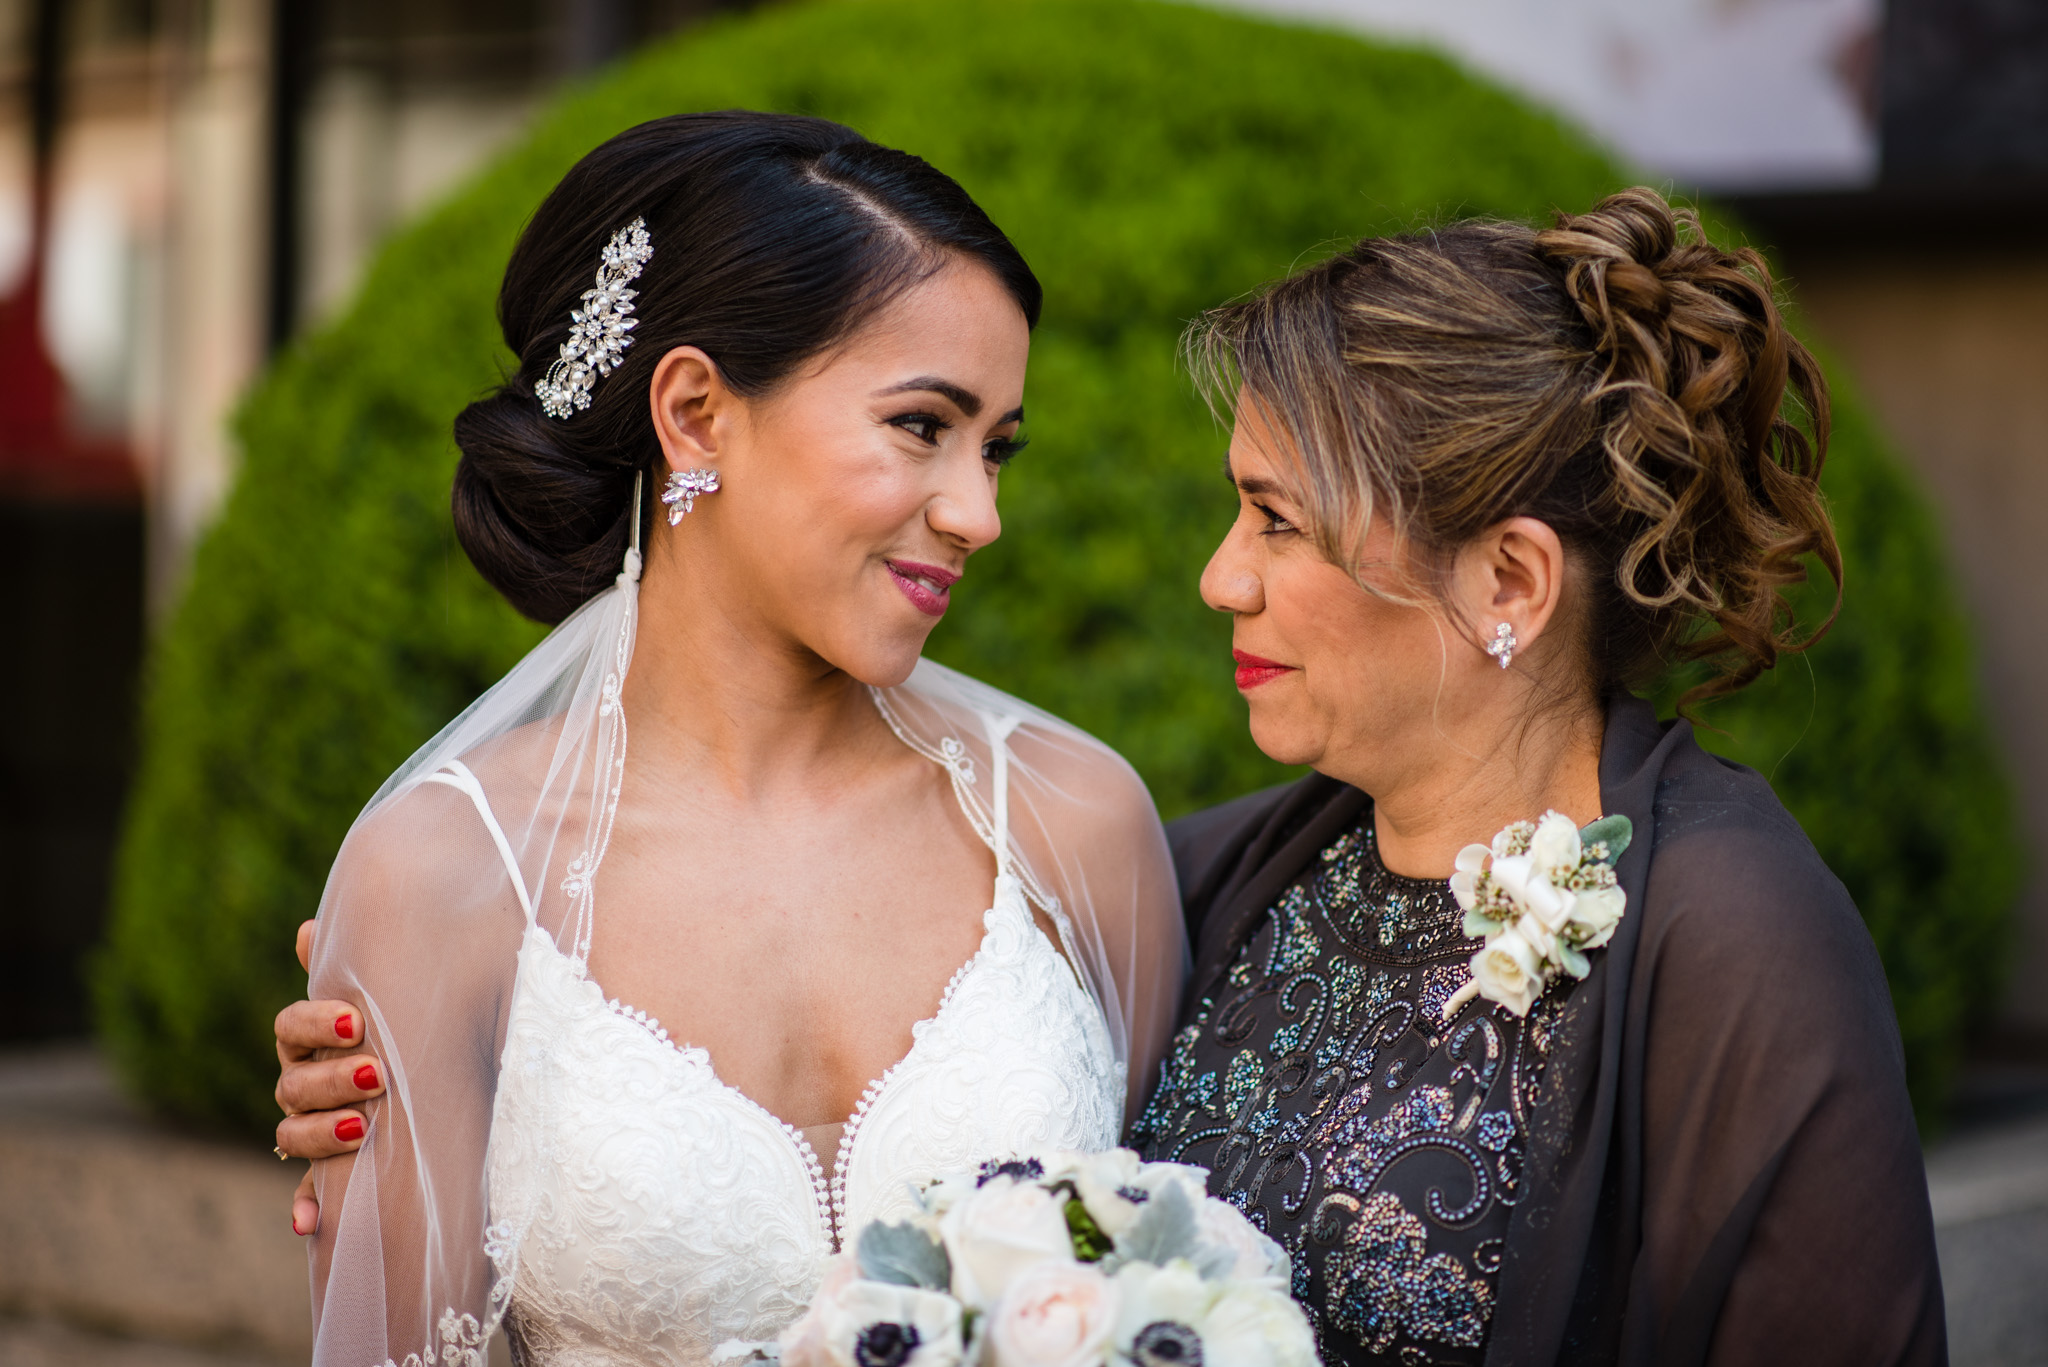 Bride and her mother enjoy a quiet moment together